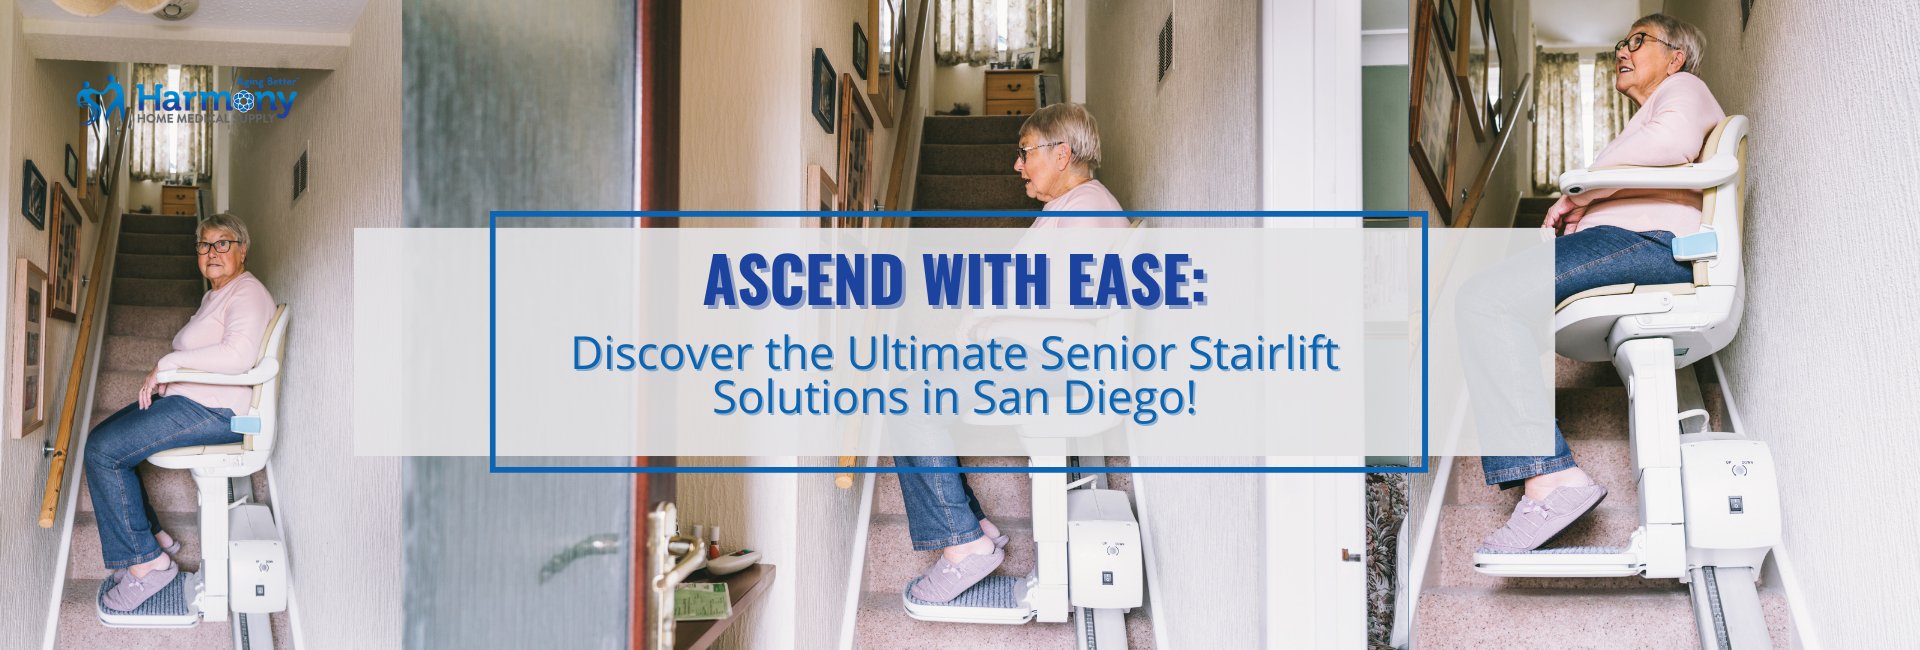 Ascend with Ease: Discover the Ultimate Senior Stairlift Solutions in San Diego!